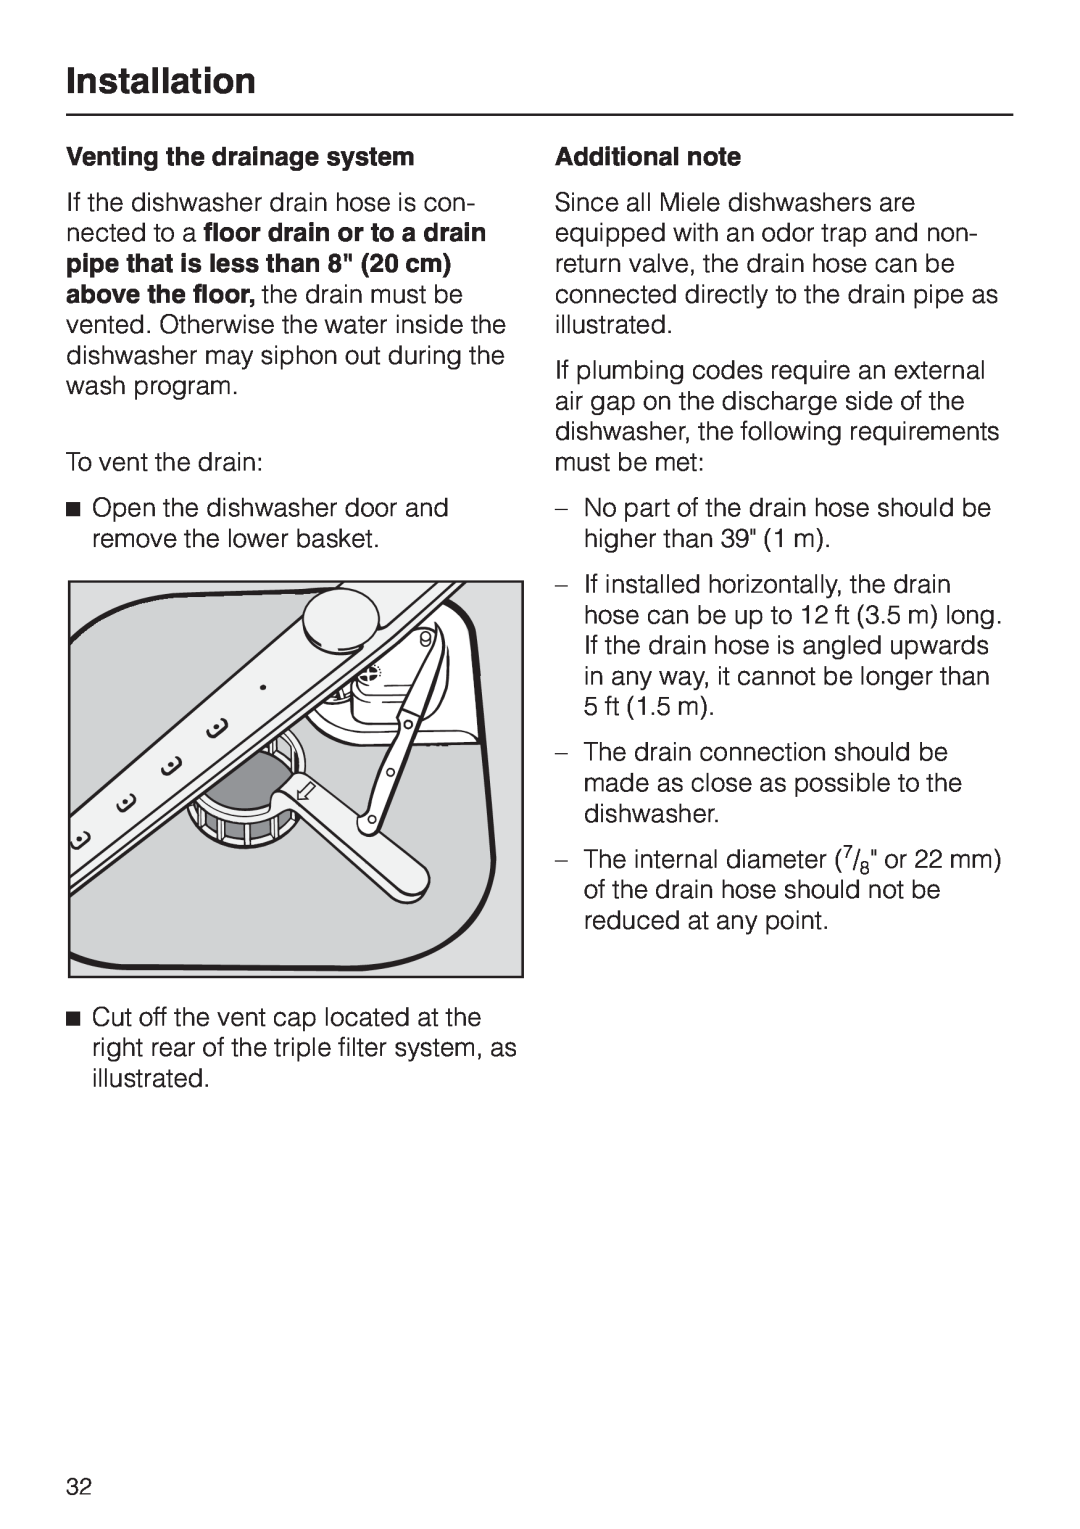 Miele HG02 installation instructions Venting the drainage system, Additional note, Installation 